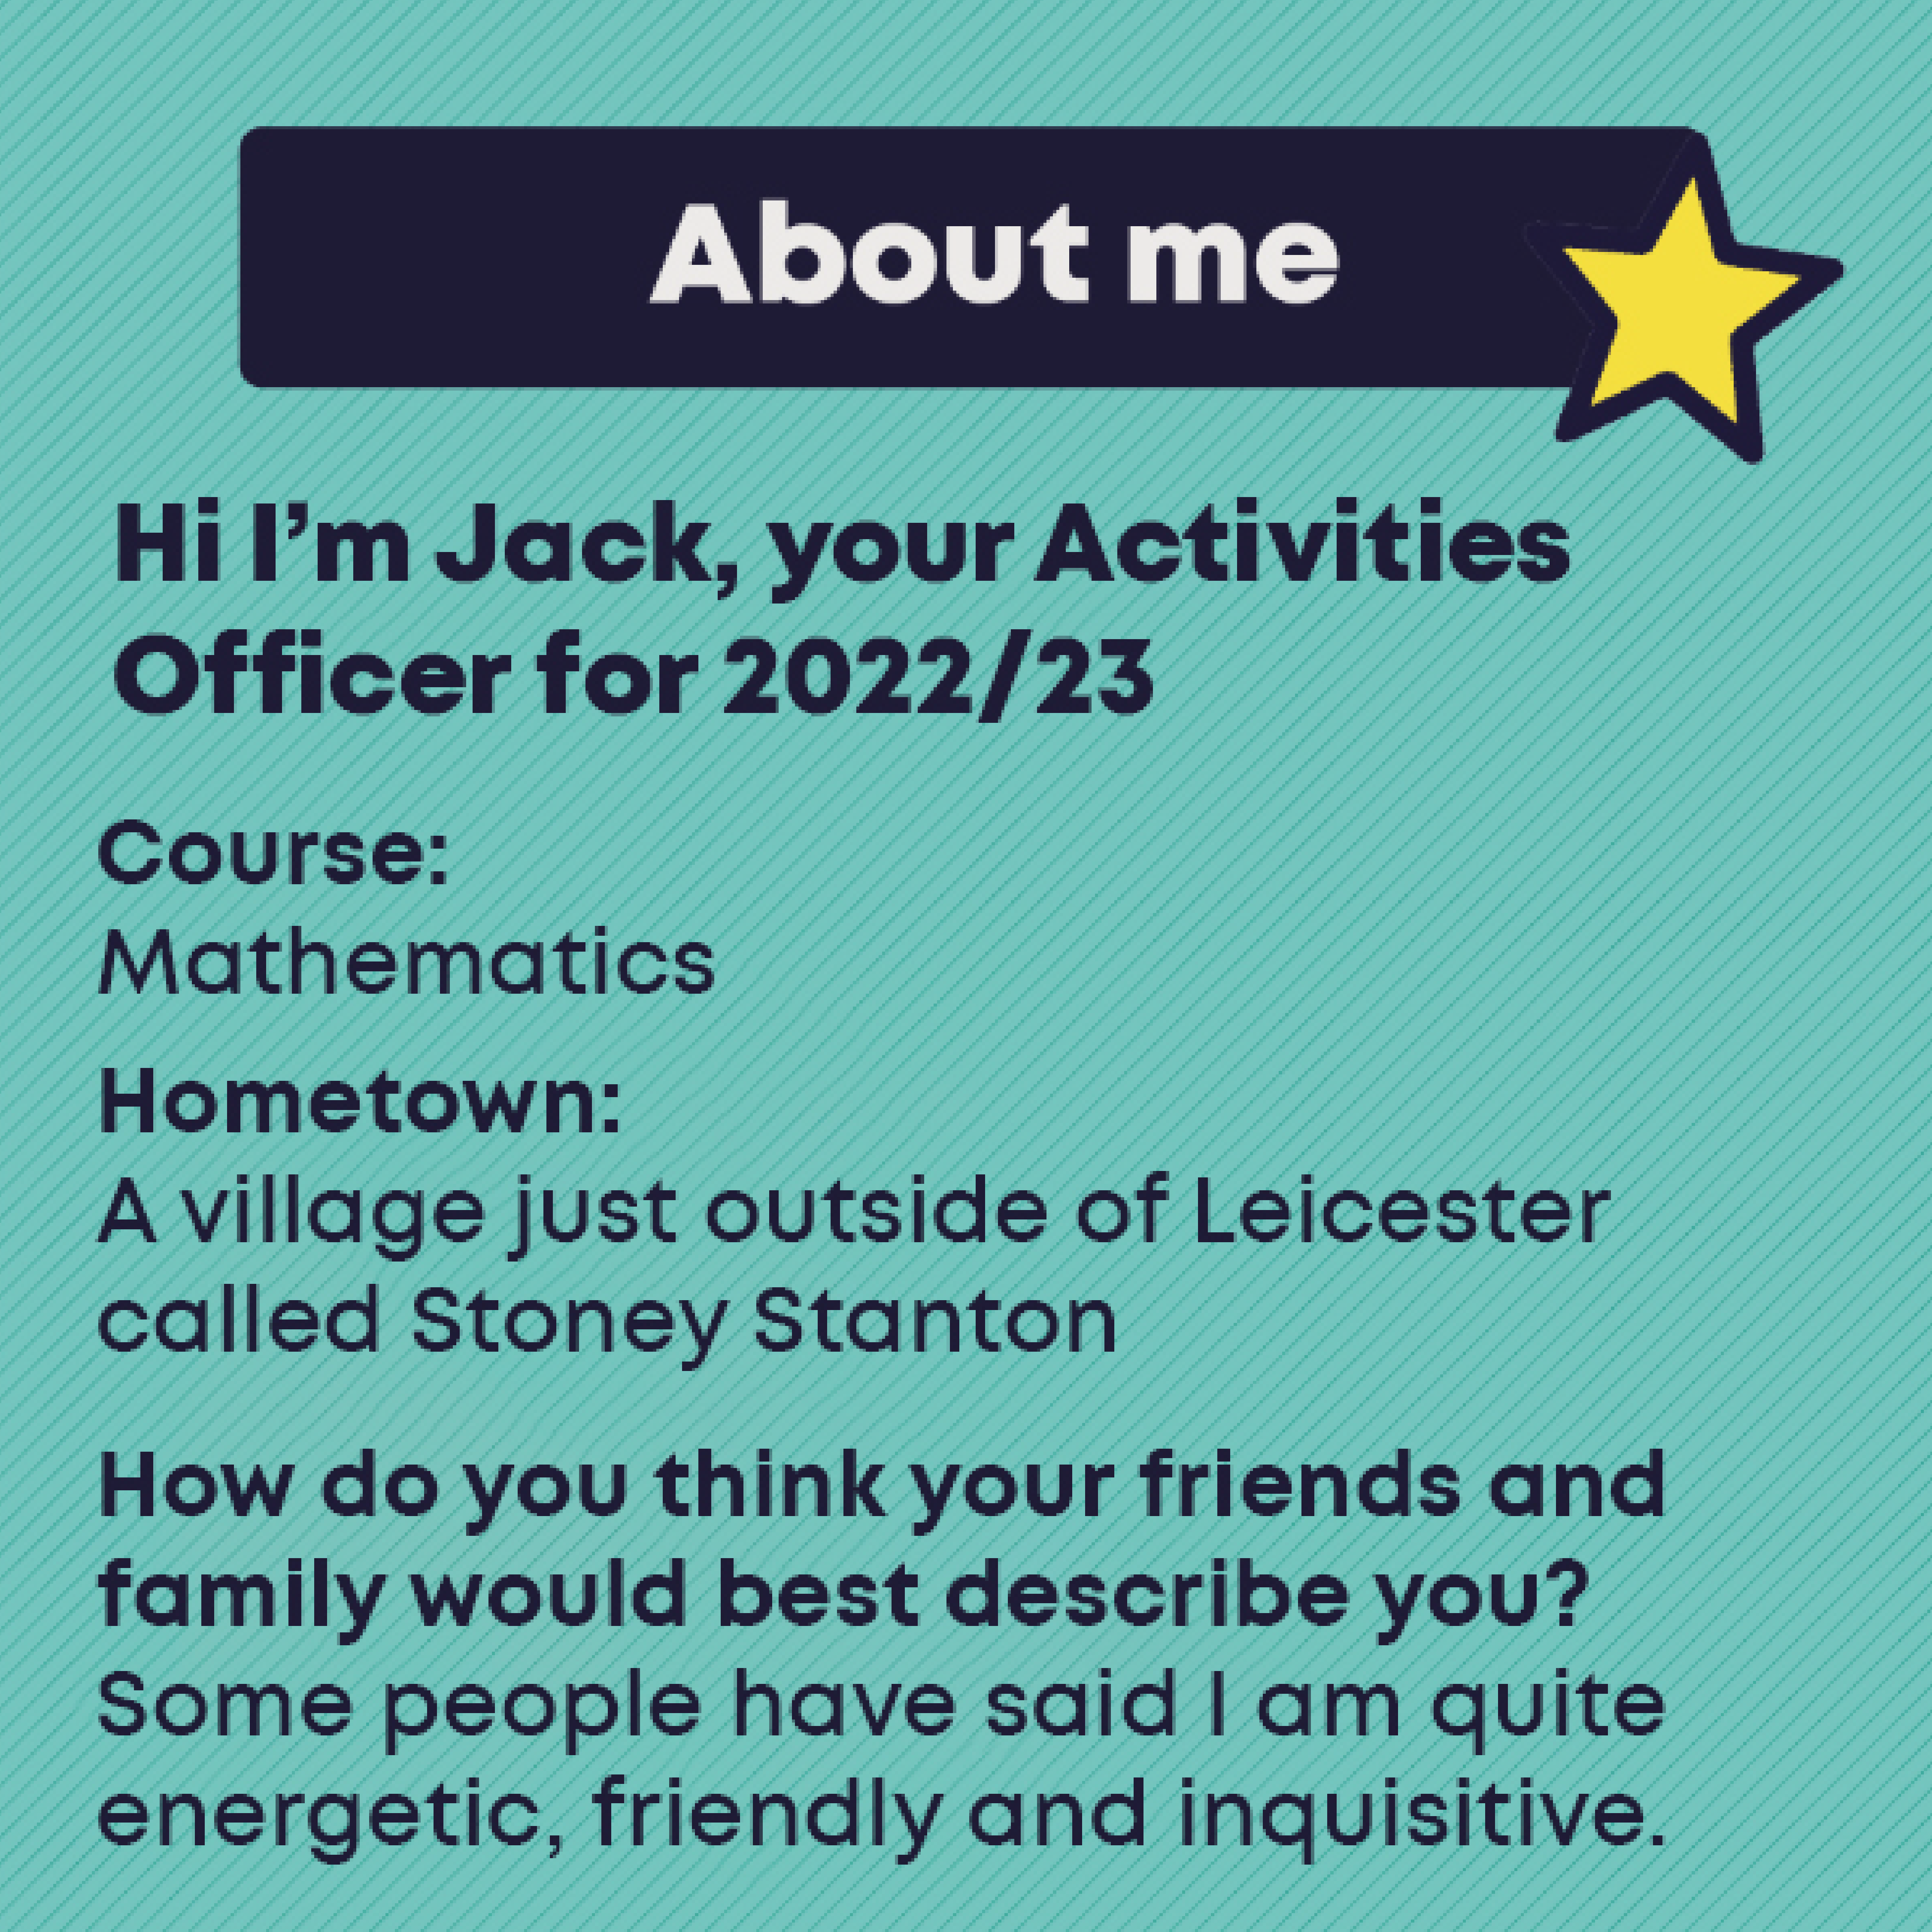 JACK McDONALD- OFFICER Profile  Course:  Mathematics MMath    Hometown    A village just outside of Leicester called Stoney Stanton      How do you think your friends and family would best describe you?        Some people have said I am quite energetic, friendly and inquisitive. 